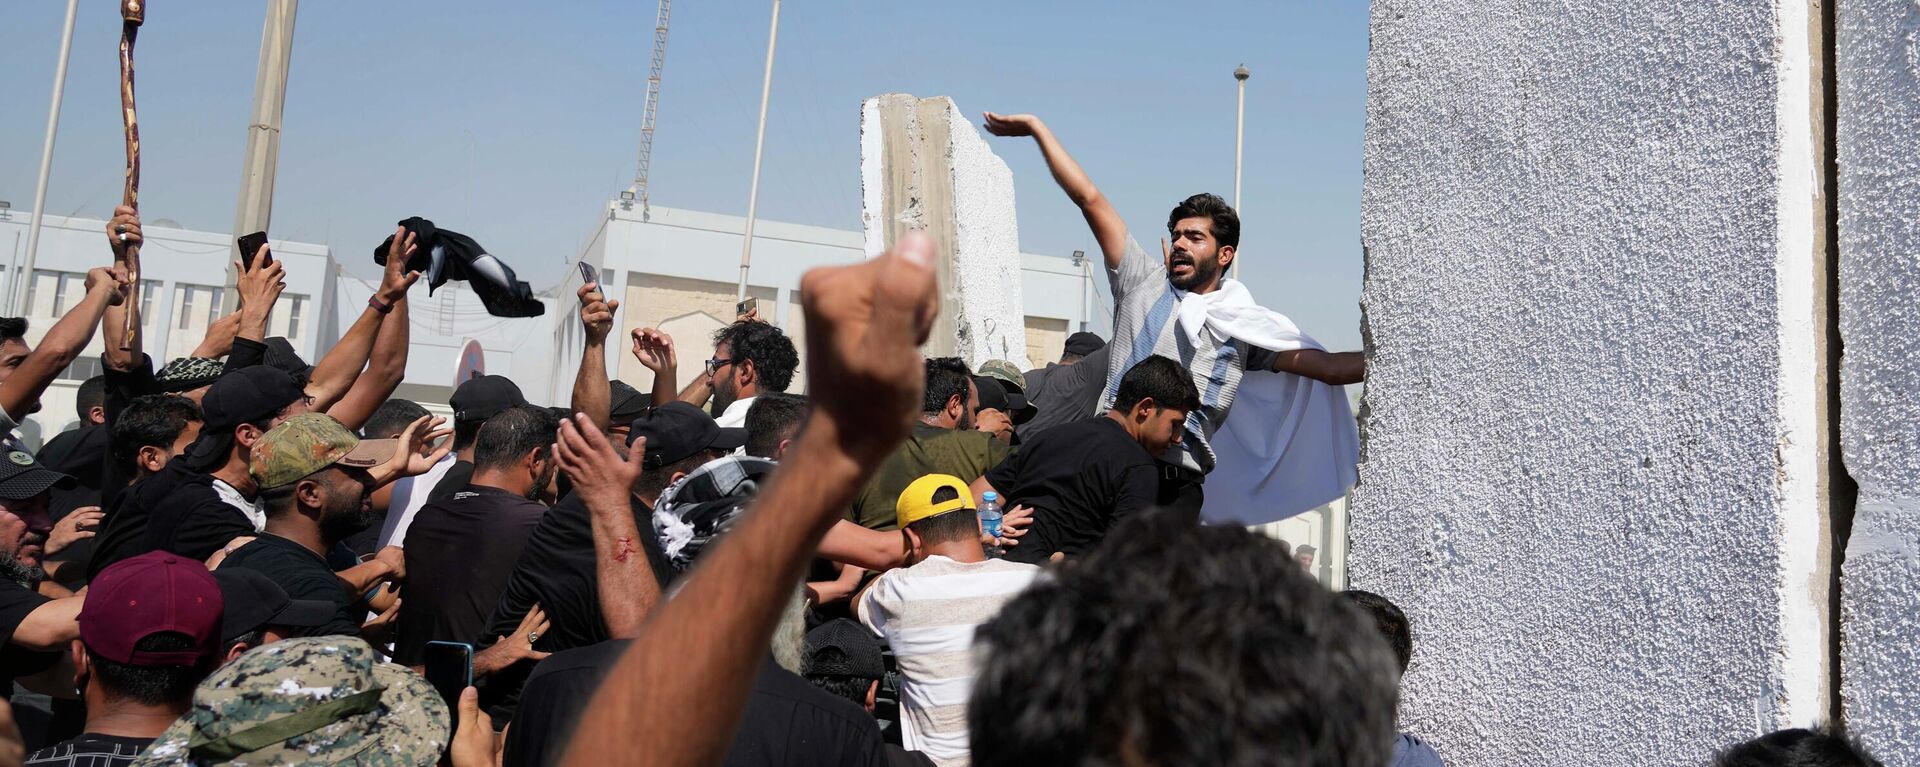 Supporters of Shiite cleric Muqtada al-Sadr try to remove concrete barriers in the Green Zone area of Baghdad, Iraq, Monday, Aug. 29, 2022.  - Sputnik International, 1920, 30.08.2022